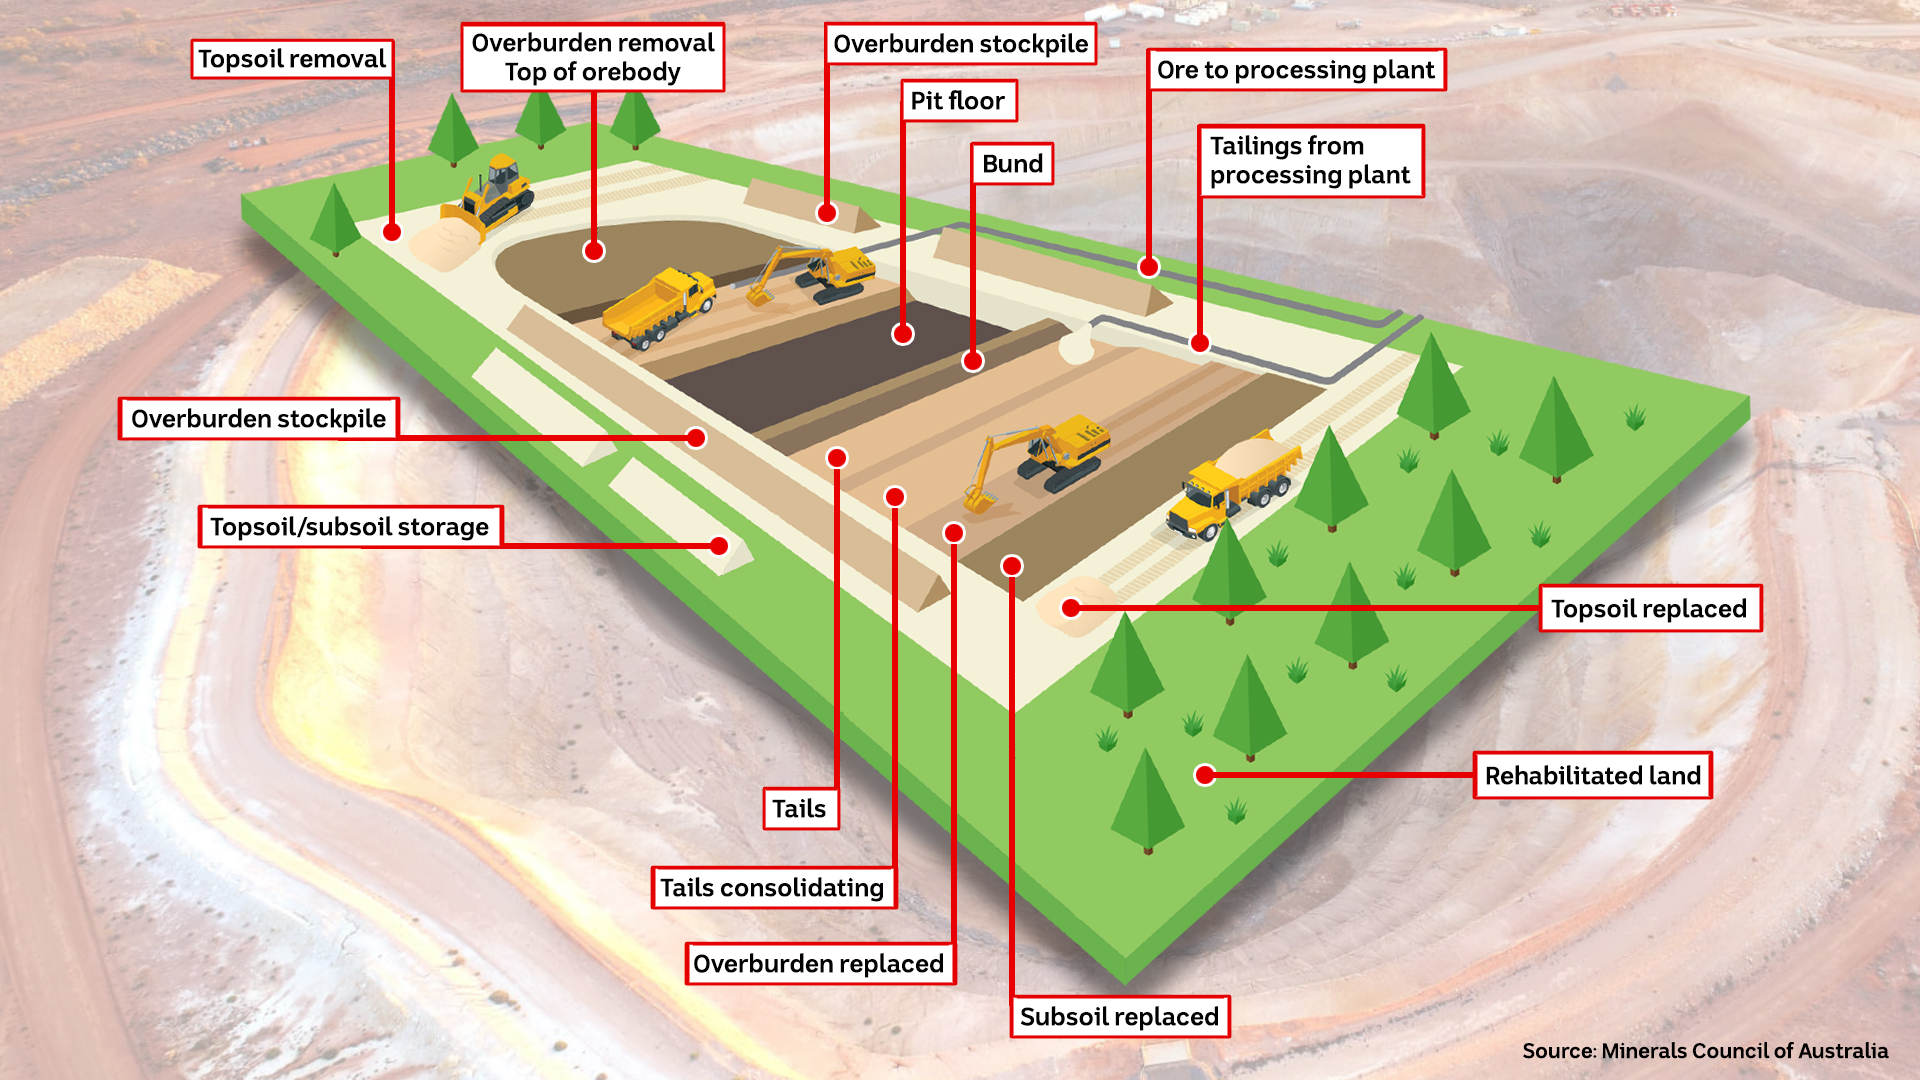 An illustration of a mine site showing an open cut pit, tailings pits and overburden